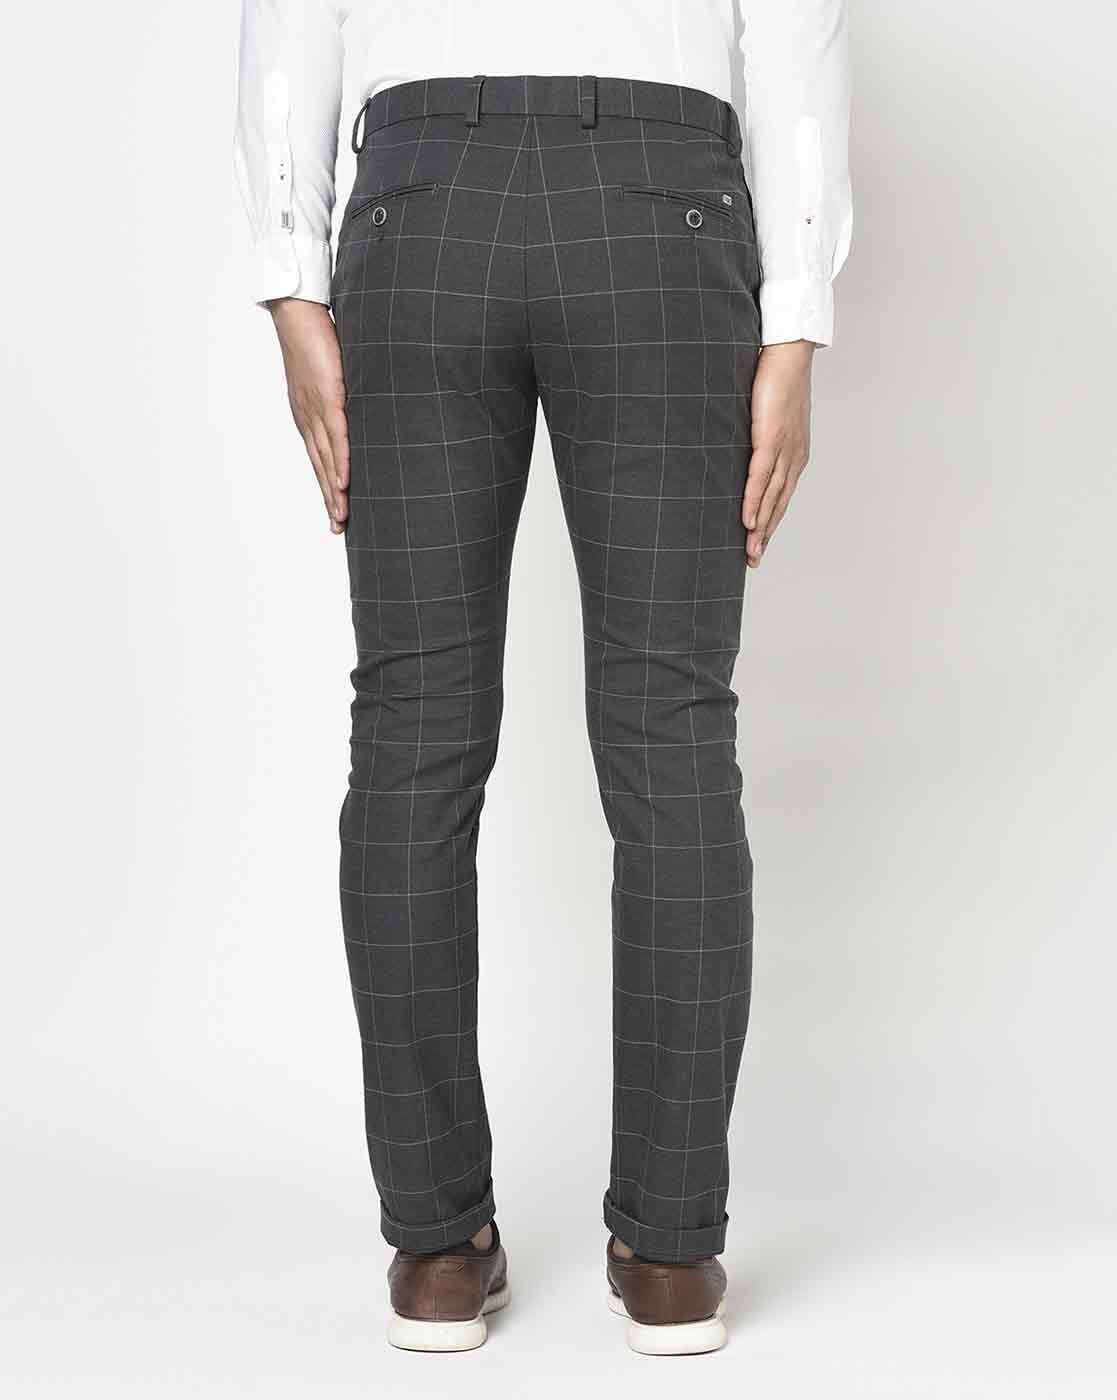 Buy Star Prince Slim Fit Check Trousers for Men Black at Amazonin